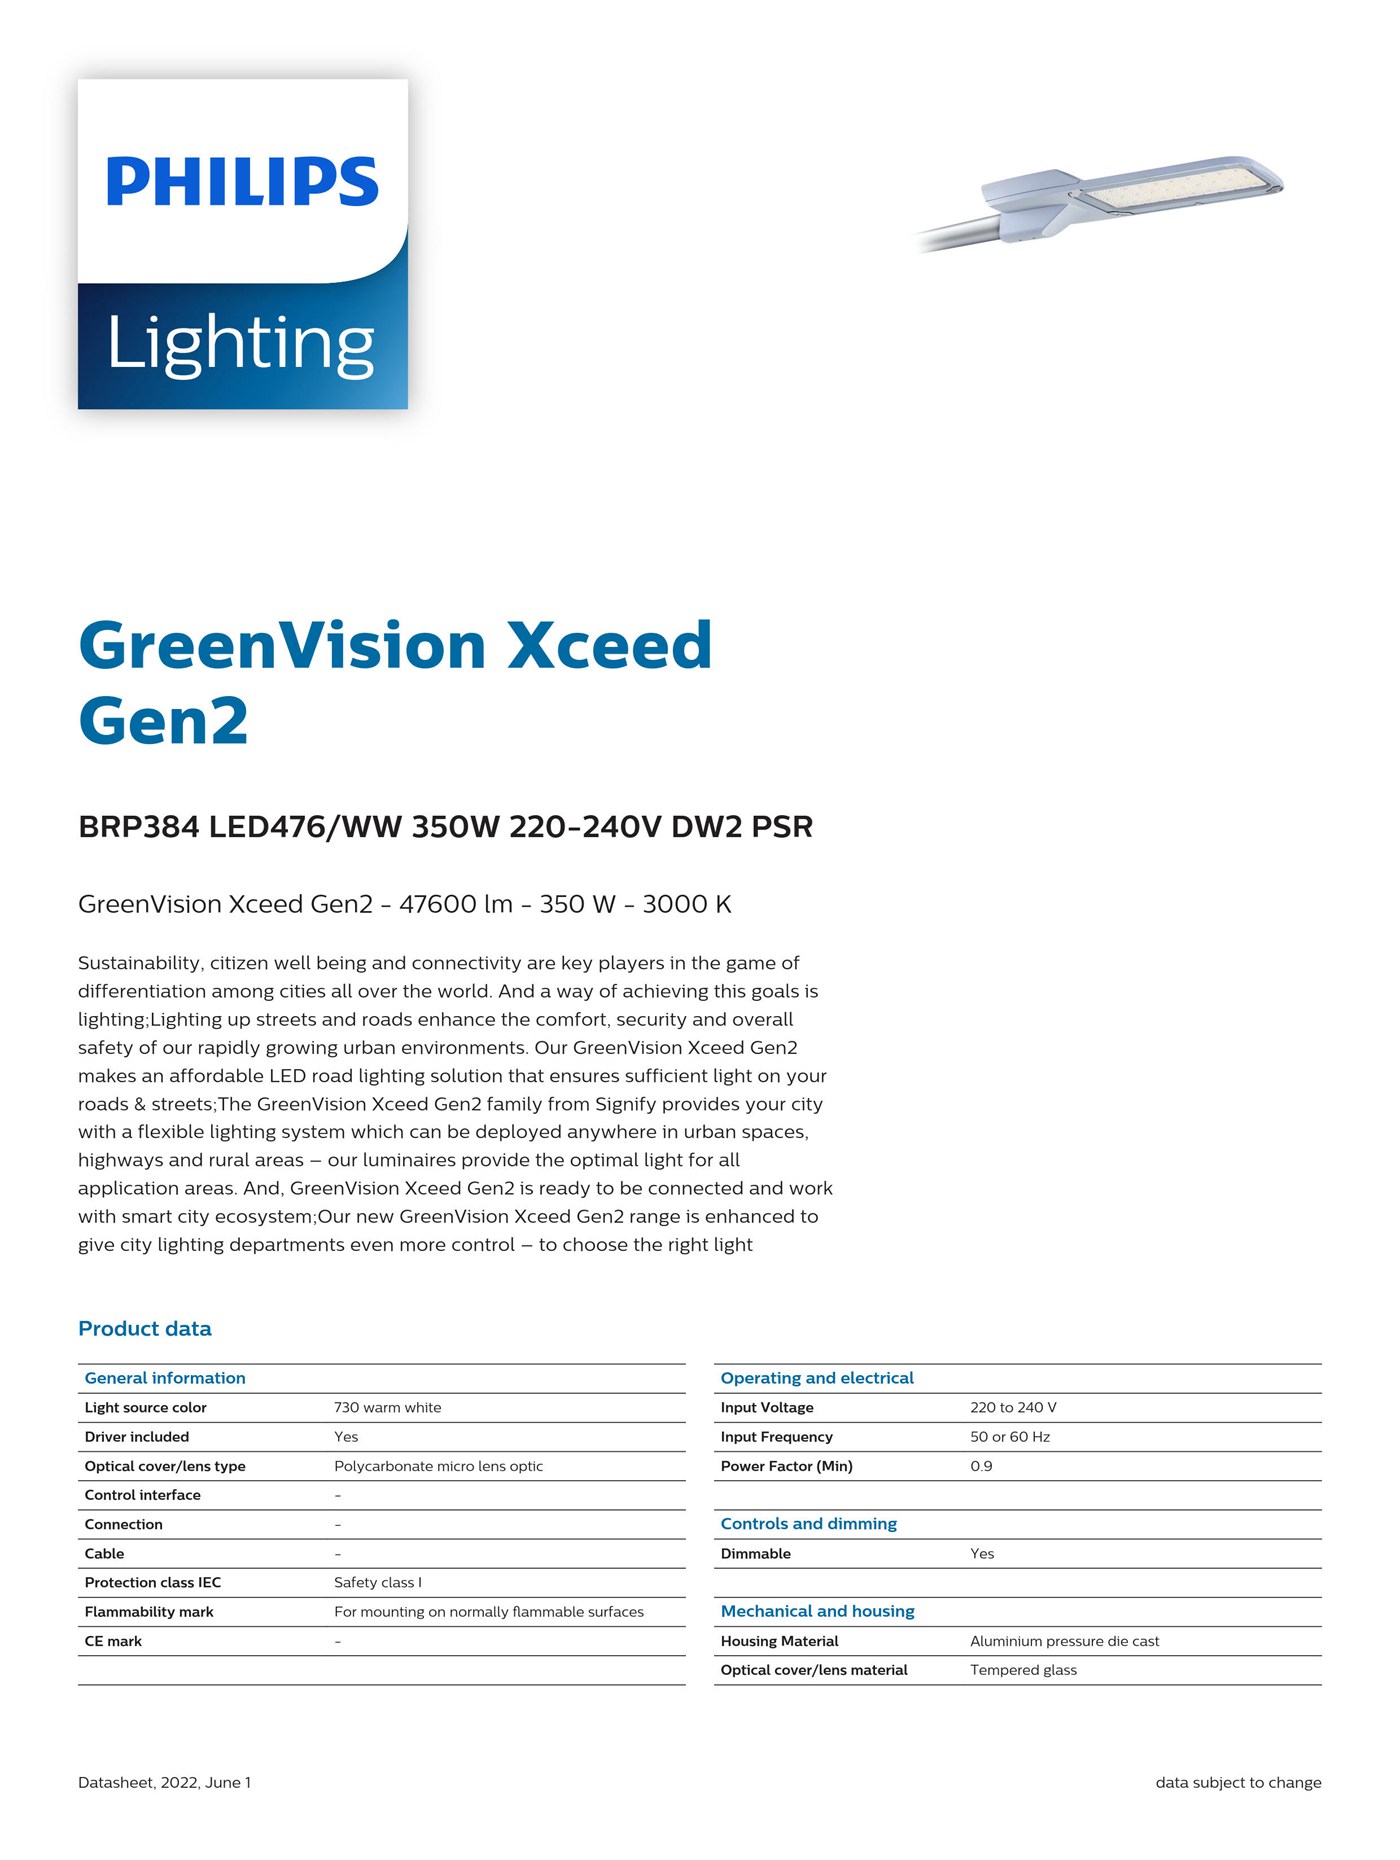 PHILIPS GreenVision Xceed Gen2 BRP384 LED476/WW 350W 220-240V DW2 PSR 911401629607